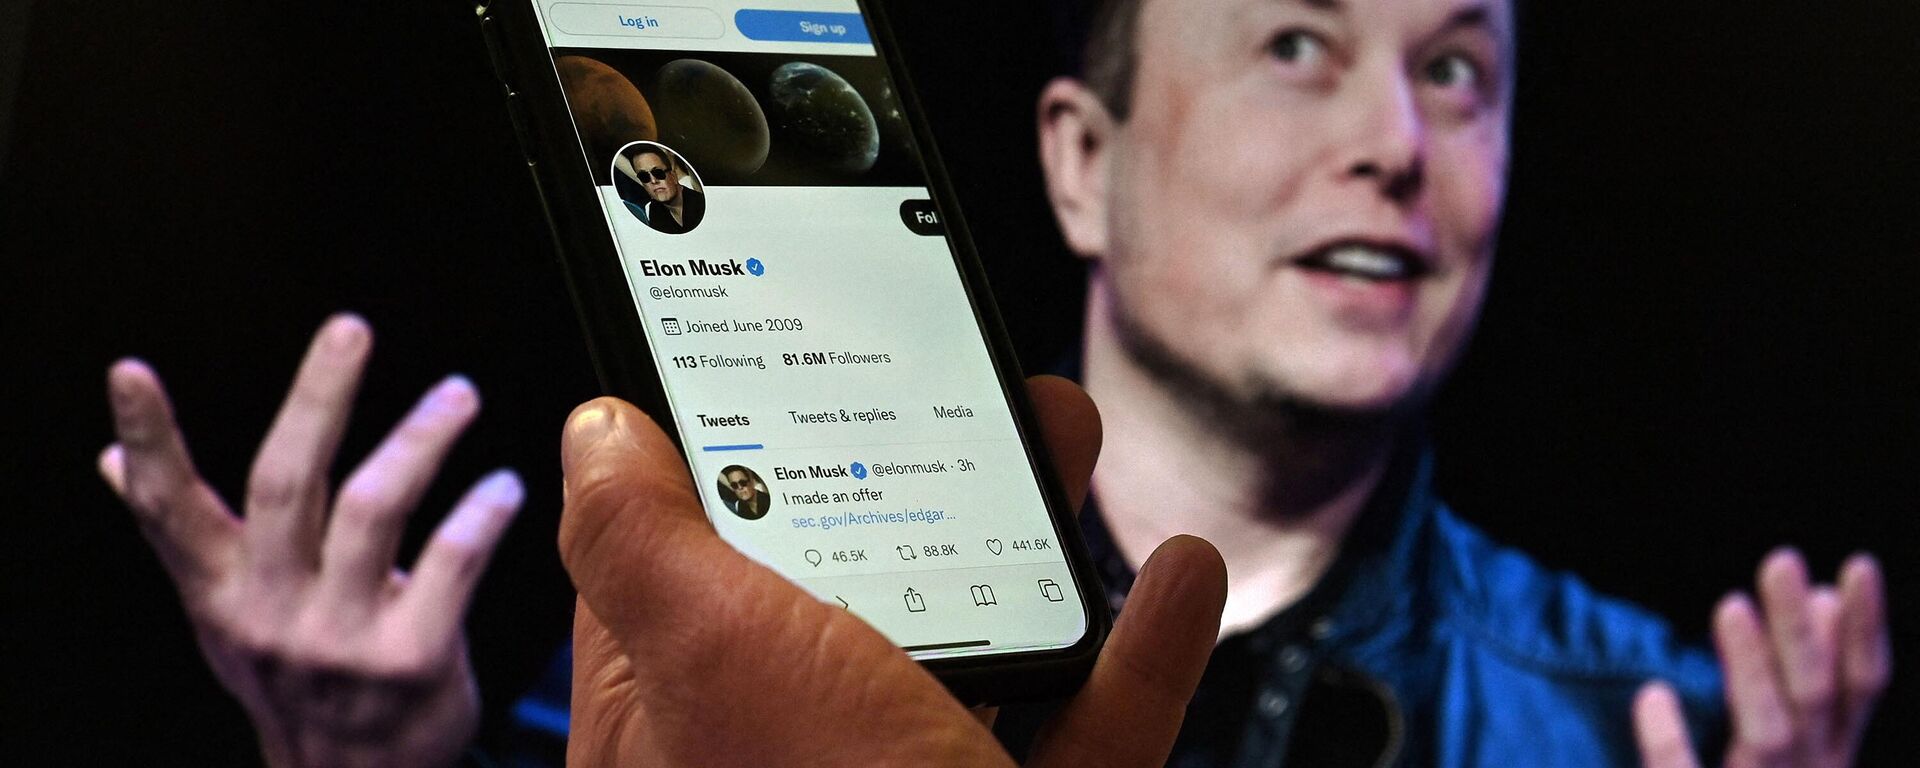 (FILES) In this file photo illustration taken on April 14, 2022 a phone screen displays the Twitter account of Elon Musk with a photo of him shown in the background, in Washington, DC.  - Sputnik International, 1920, 20.12.2022